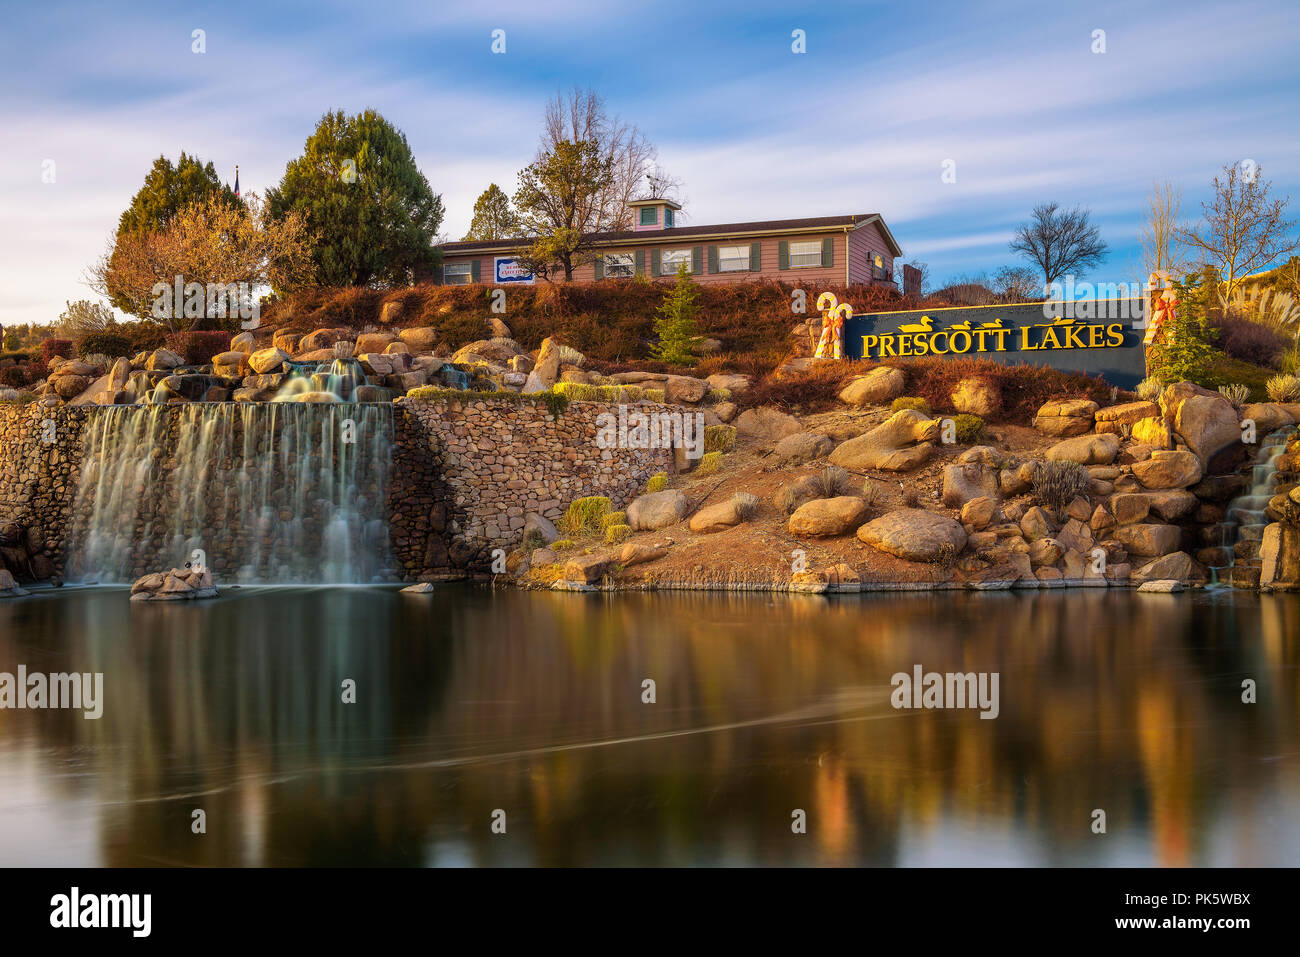 Prescott Lakes sign with an artificial waterfall in Arizona Stock Photo